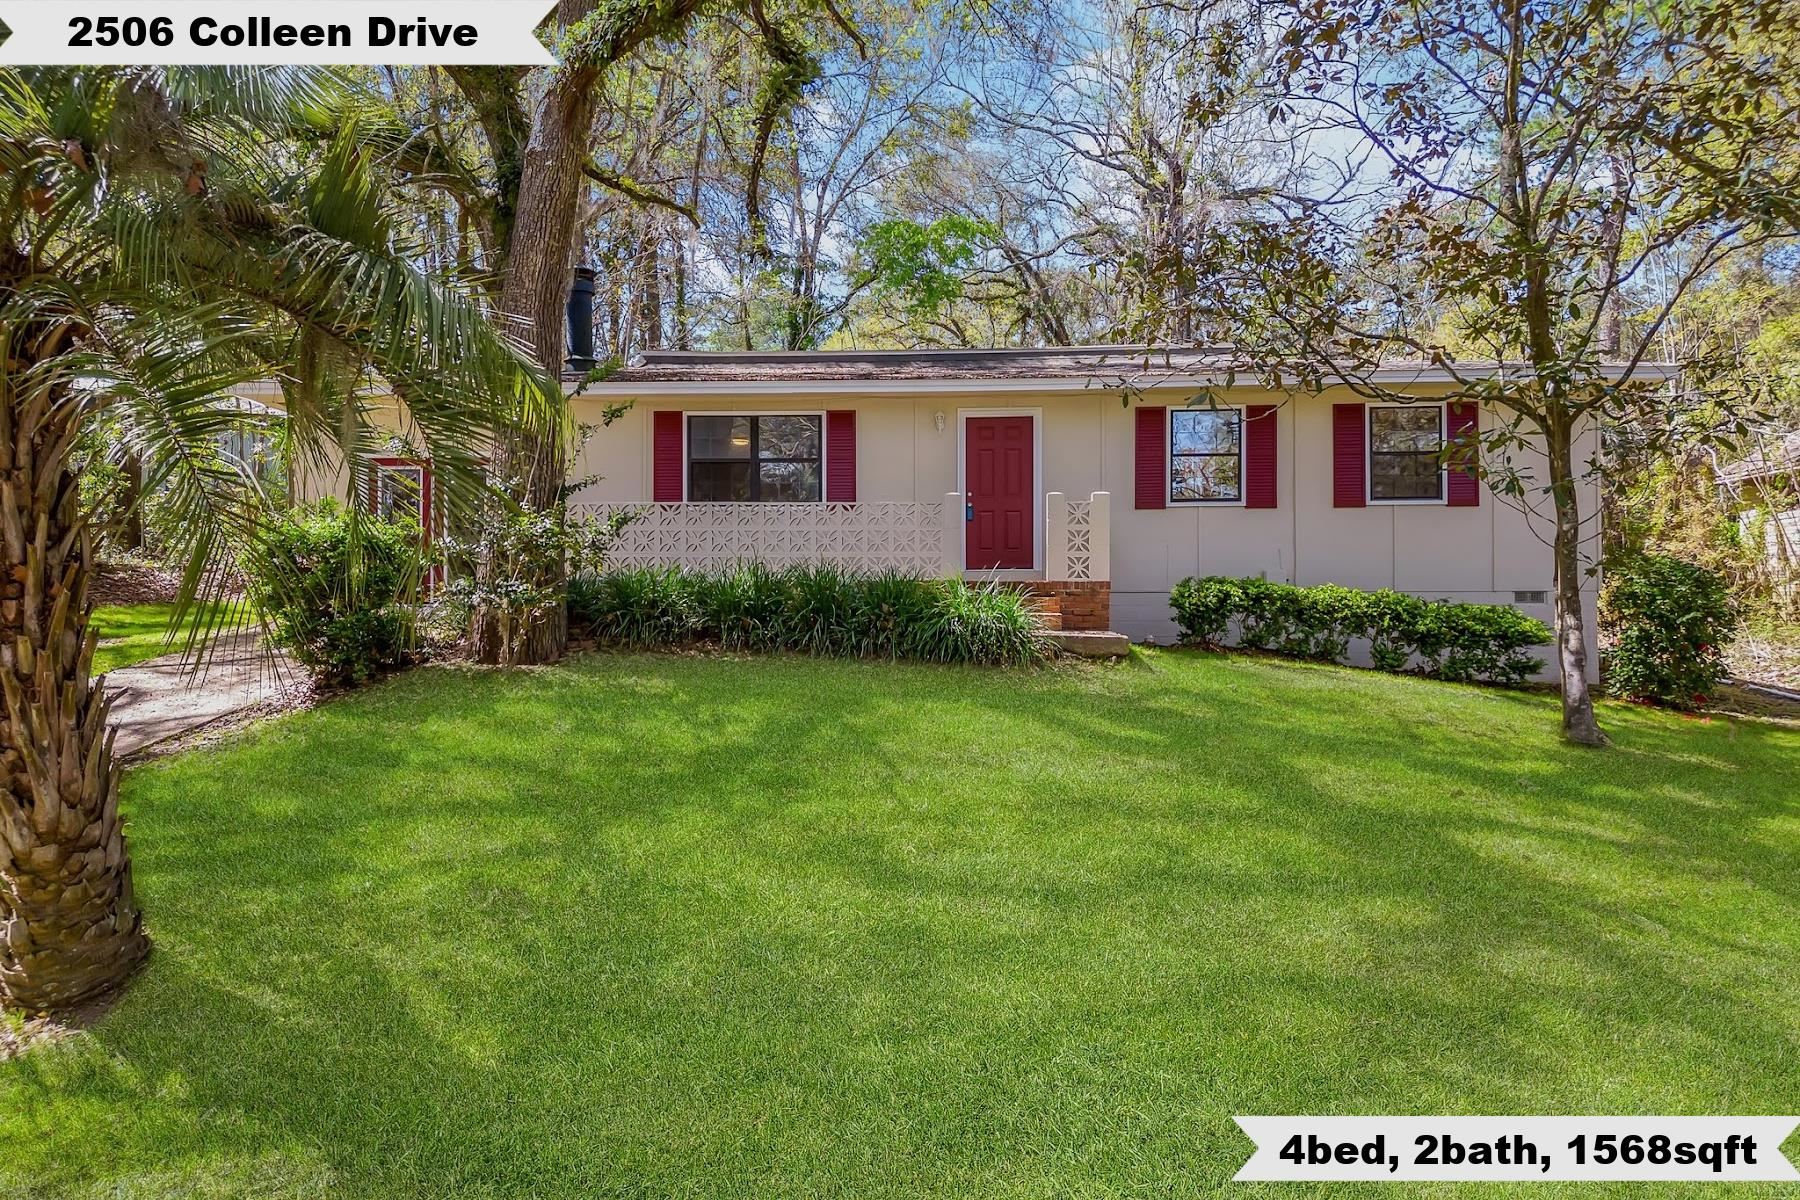 2506 Colleen Drive, TALLAHASSEE, FL 